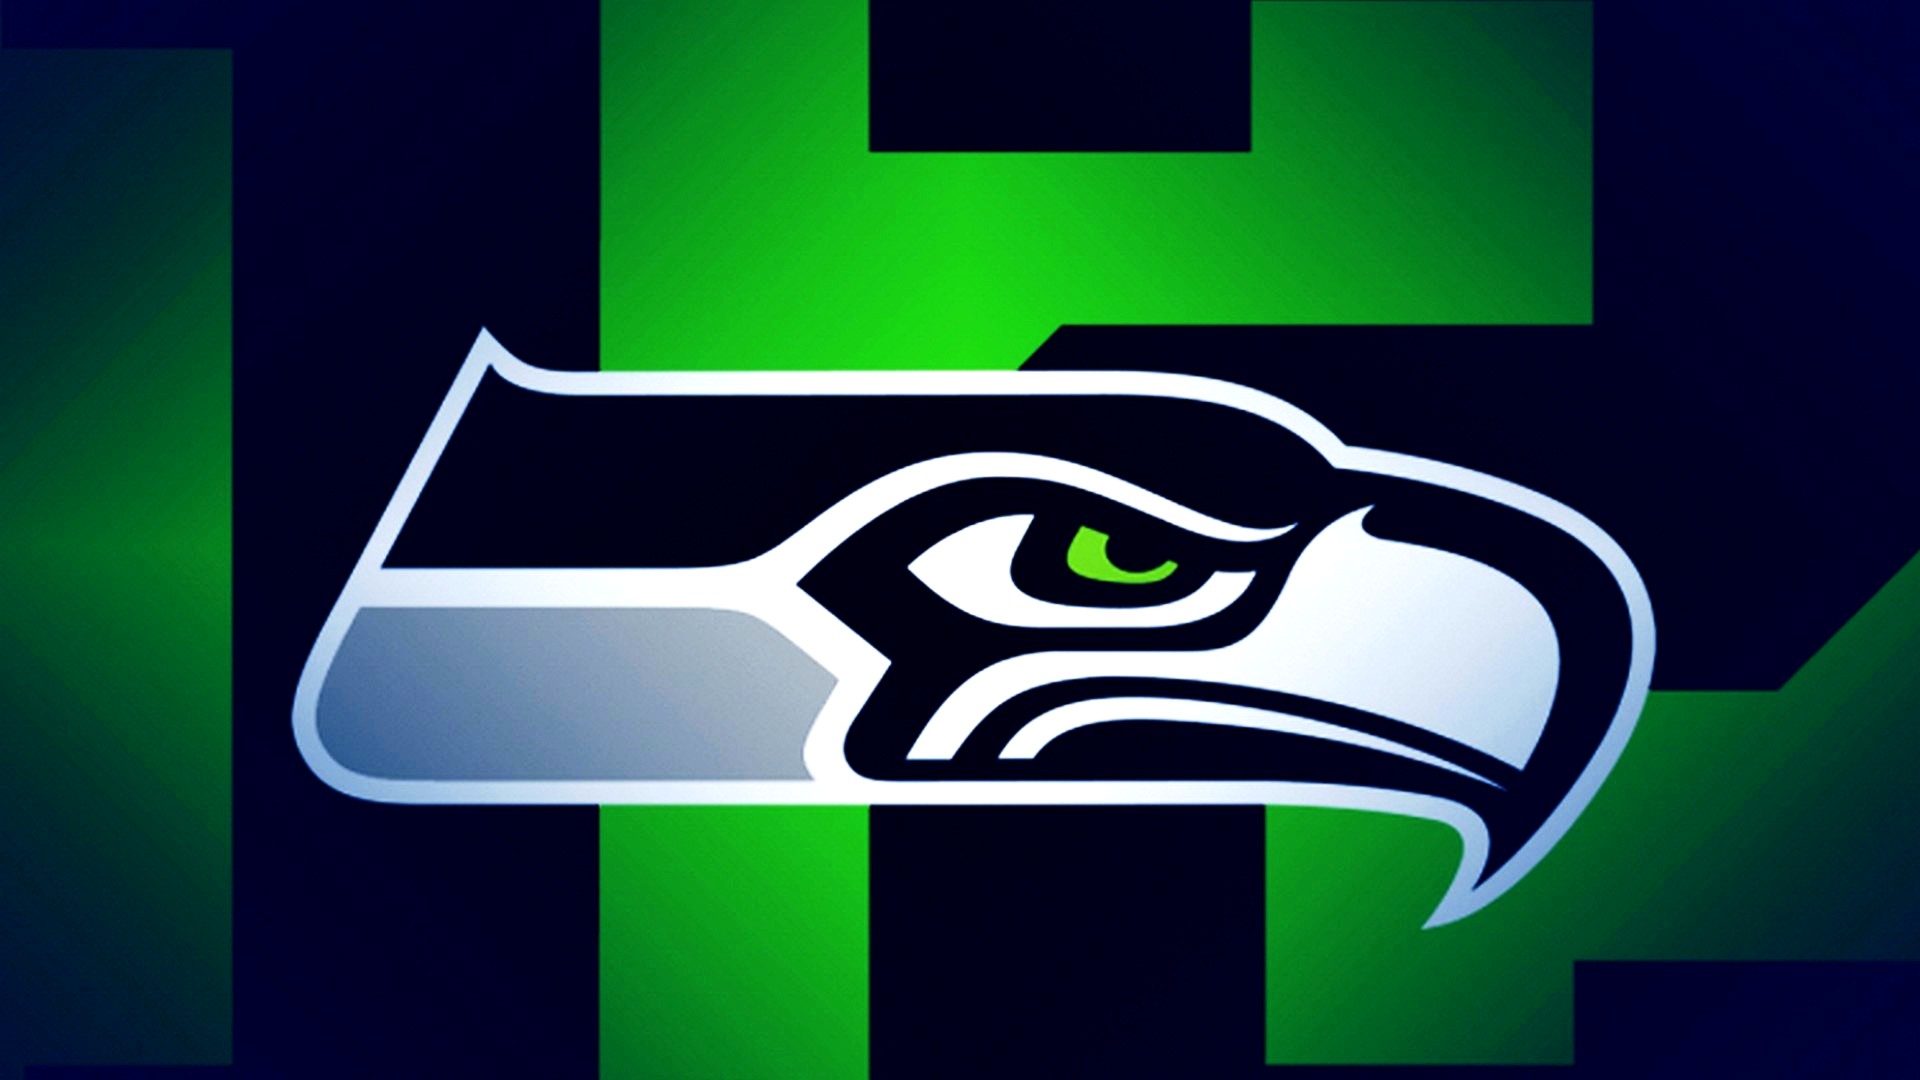 Seattle Seahawks Logo Wallpaper HD With high-resolution 1920X1080 pixel. You can use this wallpaper for your Mac or Windows Desktop Background, iPhone, Android or Tablet and another Smartphone device